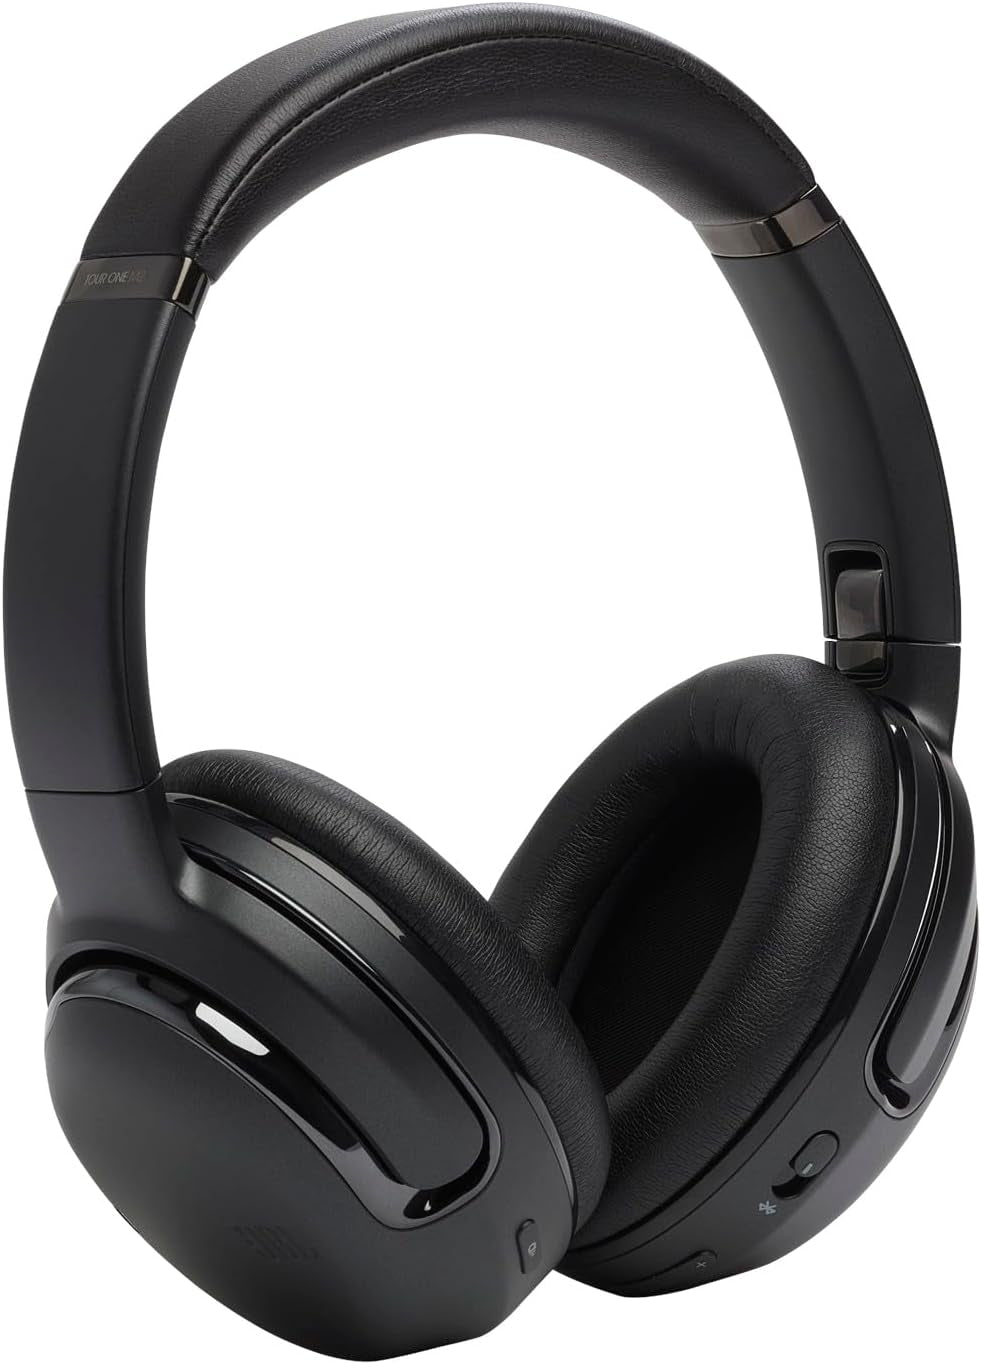 Tour One M2 - Wireless Over-Ear Noise Cancelling Headphones with up to 50 Hours of Playtime - Black